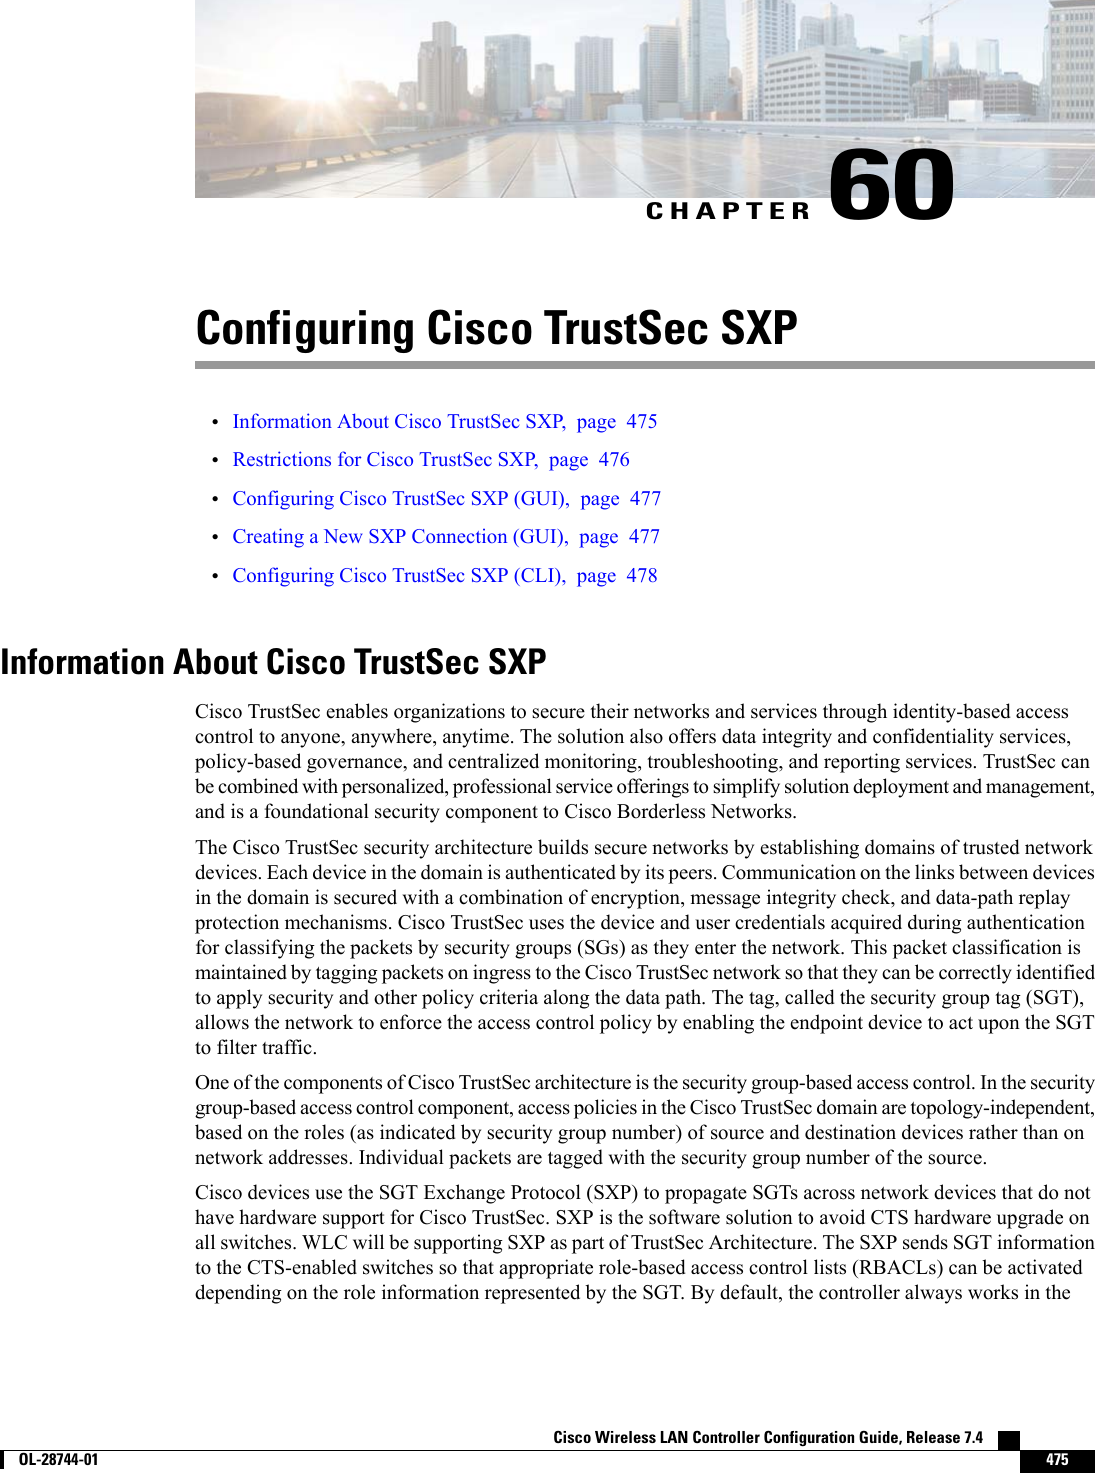 CHAPTER 60Configuring Cisco TrustSec SXP•Information About Cisco TrustSec SXP, page 475•Restrictions for Cisco TrustSec SXP, page 476•Configuring Cisco TrustSec SXP (GUI), page 477•Creating a New SXP Connection (GUI), page 477•Configuring Cisco TrustSec SXP (CLI), page 478Information About Cisco TrustSec SXPCisco TrustSec enables organizations to secure their networks and services through identity-based accesscontrol to anyone, anywhere, anytime. The solution also offers data integrity and confidentiality services,policy-based governance, and centralized monitoring, troubleshooting, and reporting services. TrustSec canbe combined with personalized, professional service offerings to simplify solution deployment and management,and is a foundational security component to Cisco Borderless Networks.The Cisco TrustSec security architecture builds secure networks by establishing domains of trusted networkdevices. Each device in the domain is authenticated by its peers. Communication on the links between devicesin the domain is secured with a combination of encryption, message integrity check, and data-path replayprotection mechanisms. Cisco TrustSec uses the device and user credentials acquired during authenticationfor classifying the packets by security groups (SGs) as they enter the network. This packet classification ismaintained by tagging packets on ingress to the Cisco TrustSec network so that they can be correctly identifiedto apply security and other policy criteria along the data path. The tag, called the security group tag (SGT),allows the network to enforce the access control policy by enabling the endpoint device to act upon the SGTto filter traffic.One of the components of Cisco TrustSec architecture is the security group-based access control. In the securitygroup-based access control component, access policies in the Cisco TrustSec domain are topology-independent,based on the roles (as indicated by security group number) of source and destination devices rather than onnetwork addresses. Individual packets are tagged with the security group number of the source.Cisco devices use the SGT Exchange Protocol (SXP) to propagate SGTs across network devices that do nothave hardware support for Cisco TrustSec. SXP is the software solution to avoid CTS hardware upgrade onall switches. WLC will be supporting SXP as part of TrustSec Architecture. The SXP sends SGT informationto the CTS-enabled switches so that appropriate role-based access control lists (RBACLs) can be activateddepending on the role information represented by the SGT. By default, the controller always works in theCisco Wireless LAN Controller Configuration Guide, Release 7.4        OL-28744-01 475